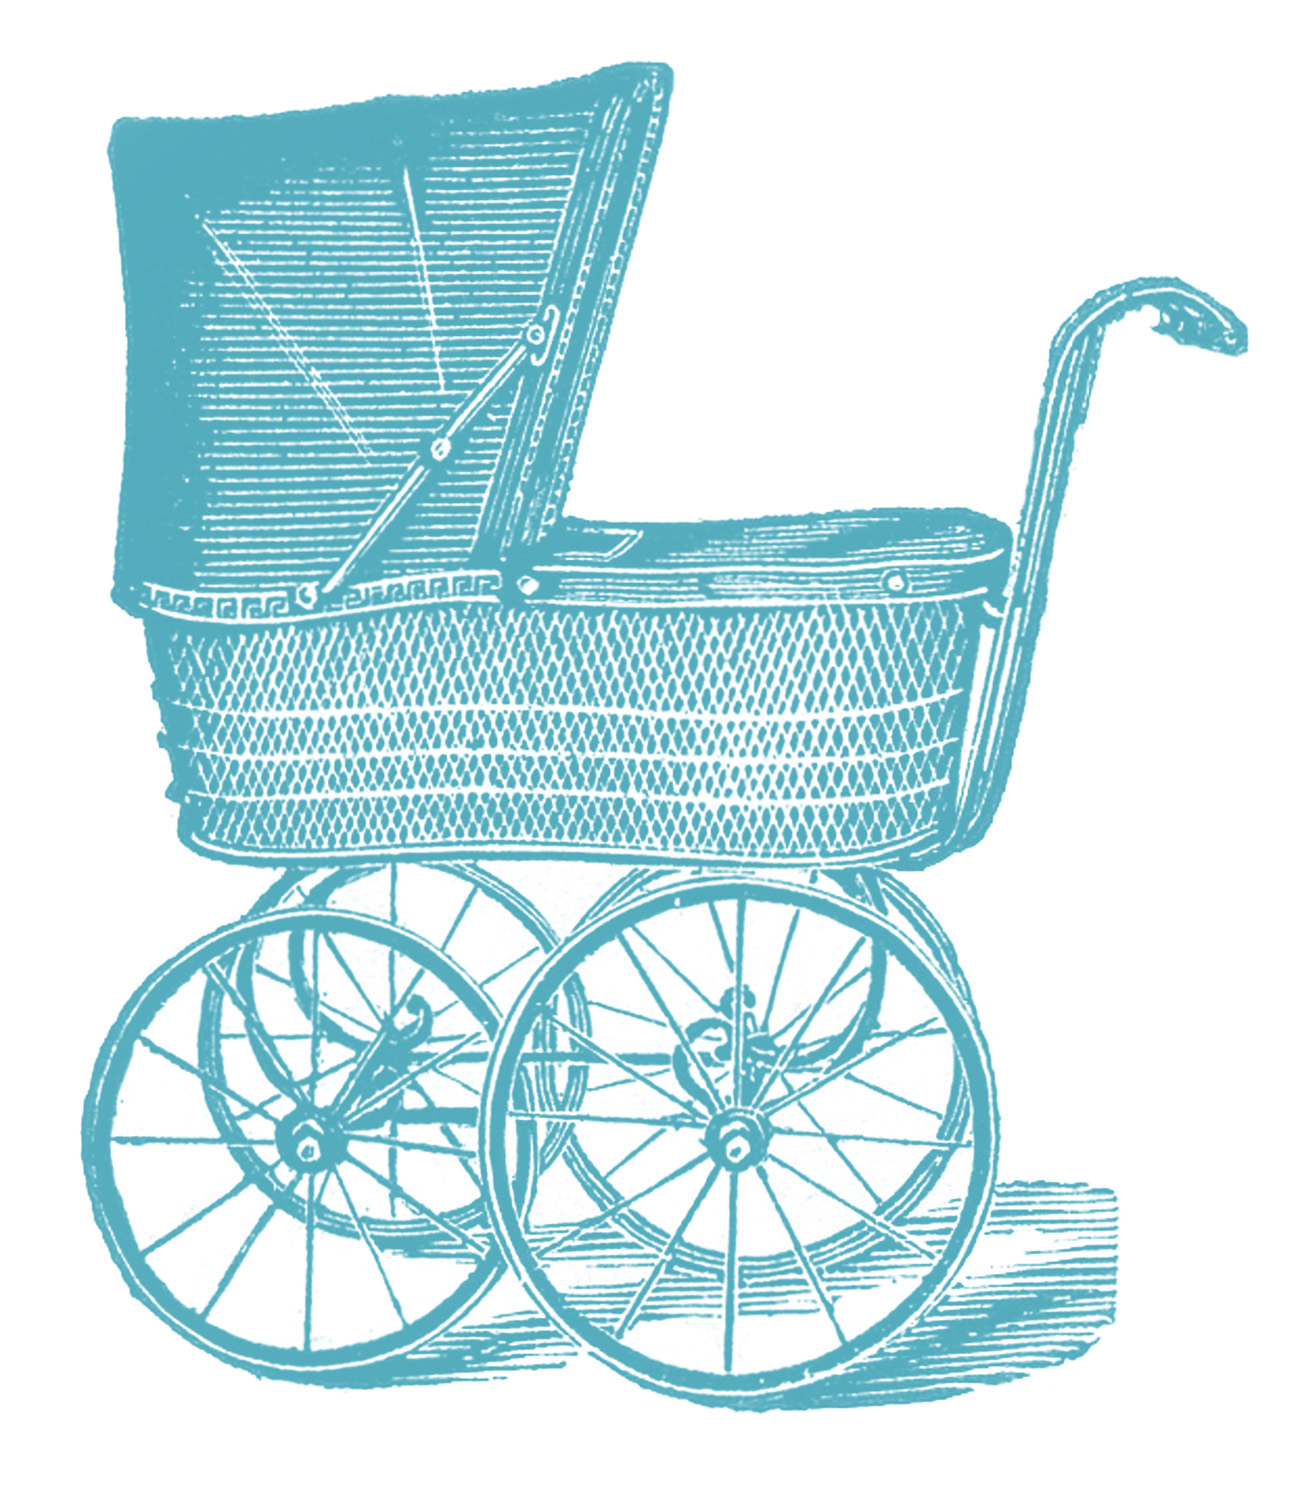 Royalty Free Images   Vintage Baby Carriages   The Graphics Fairy